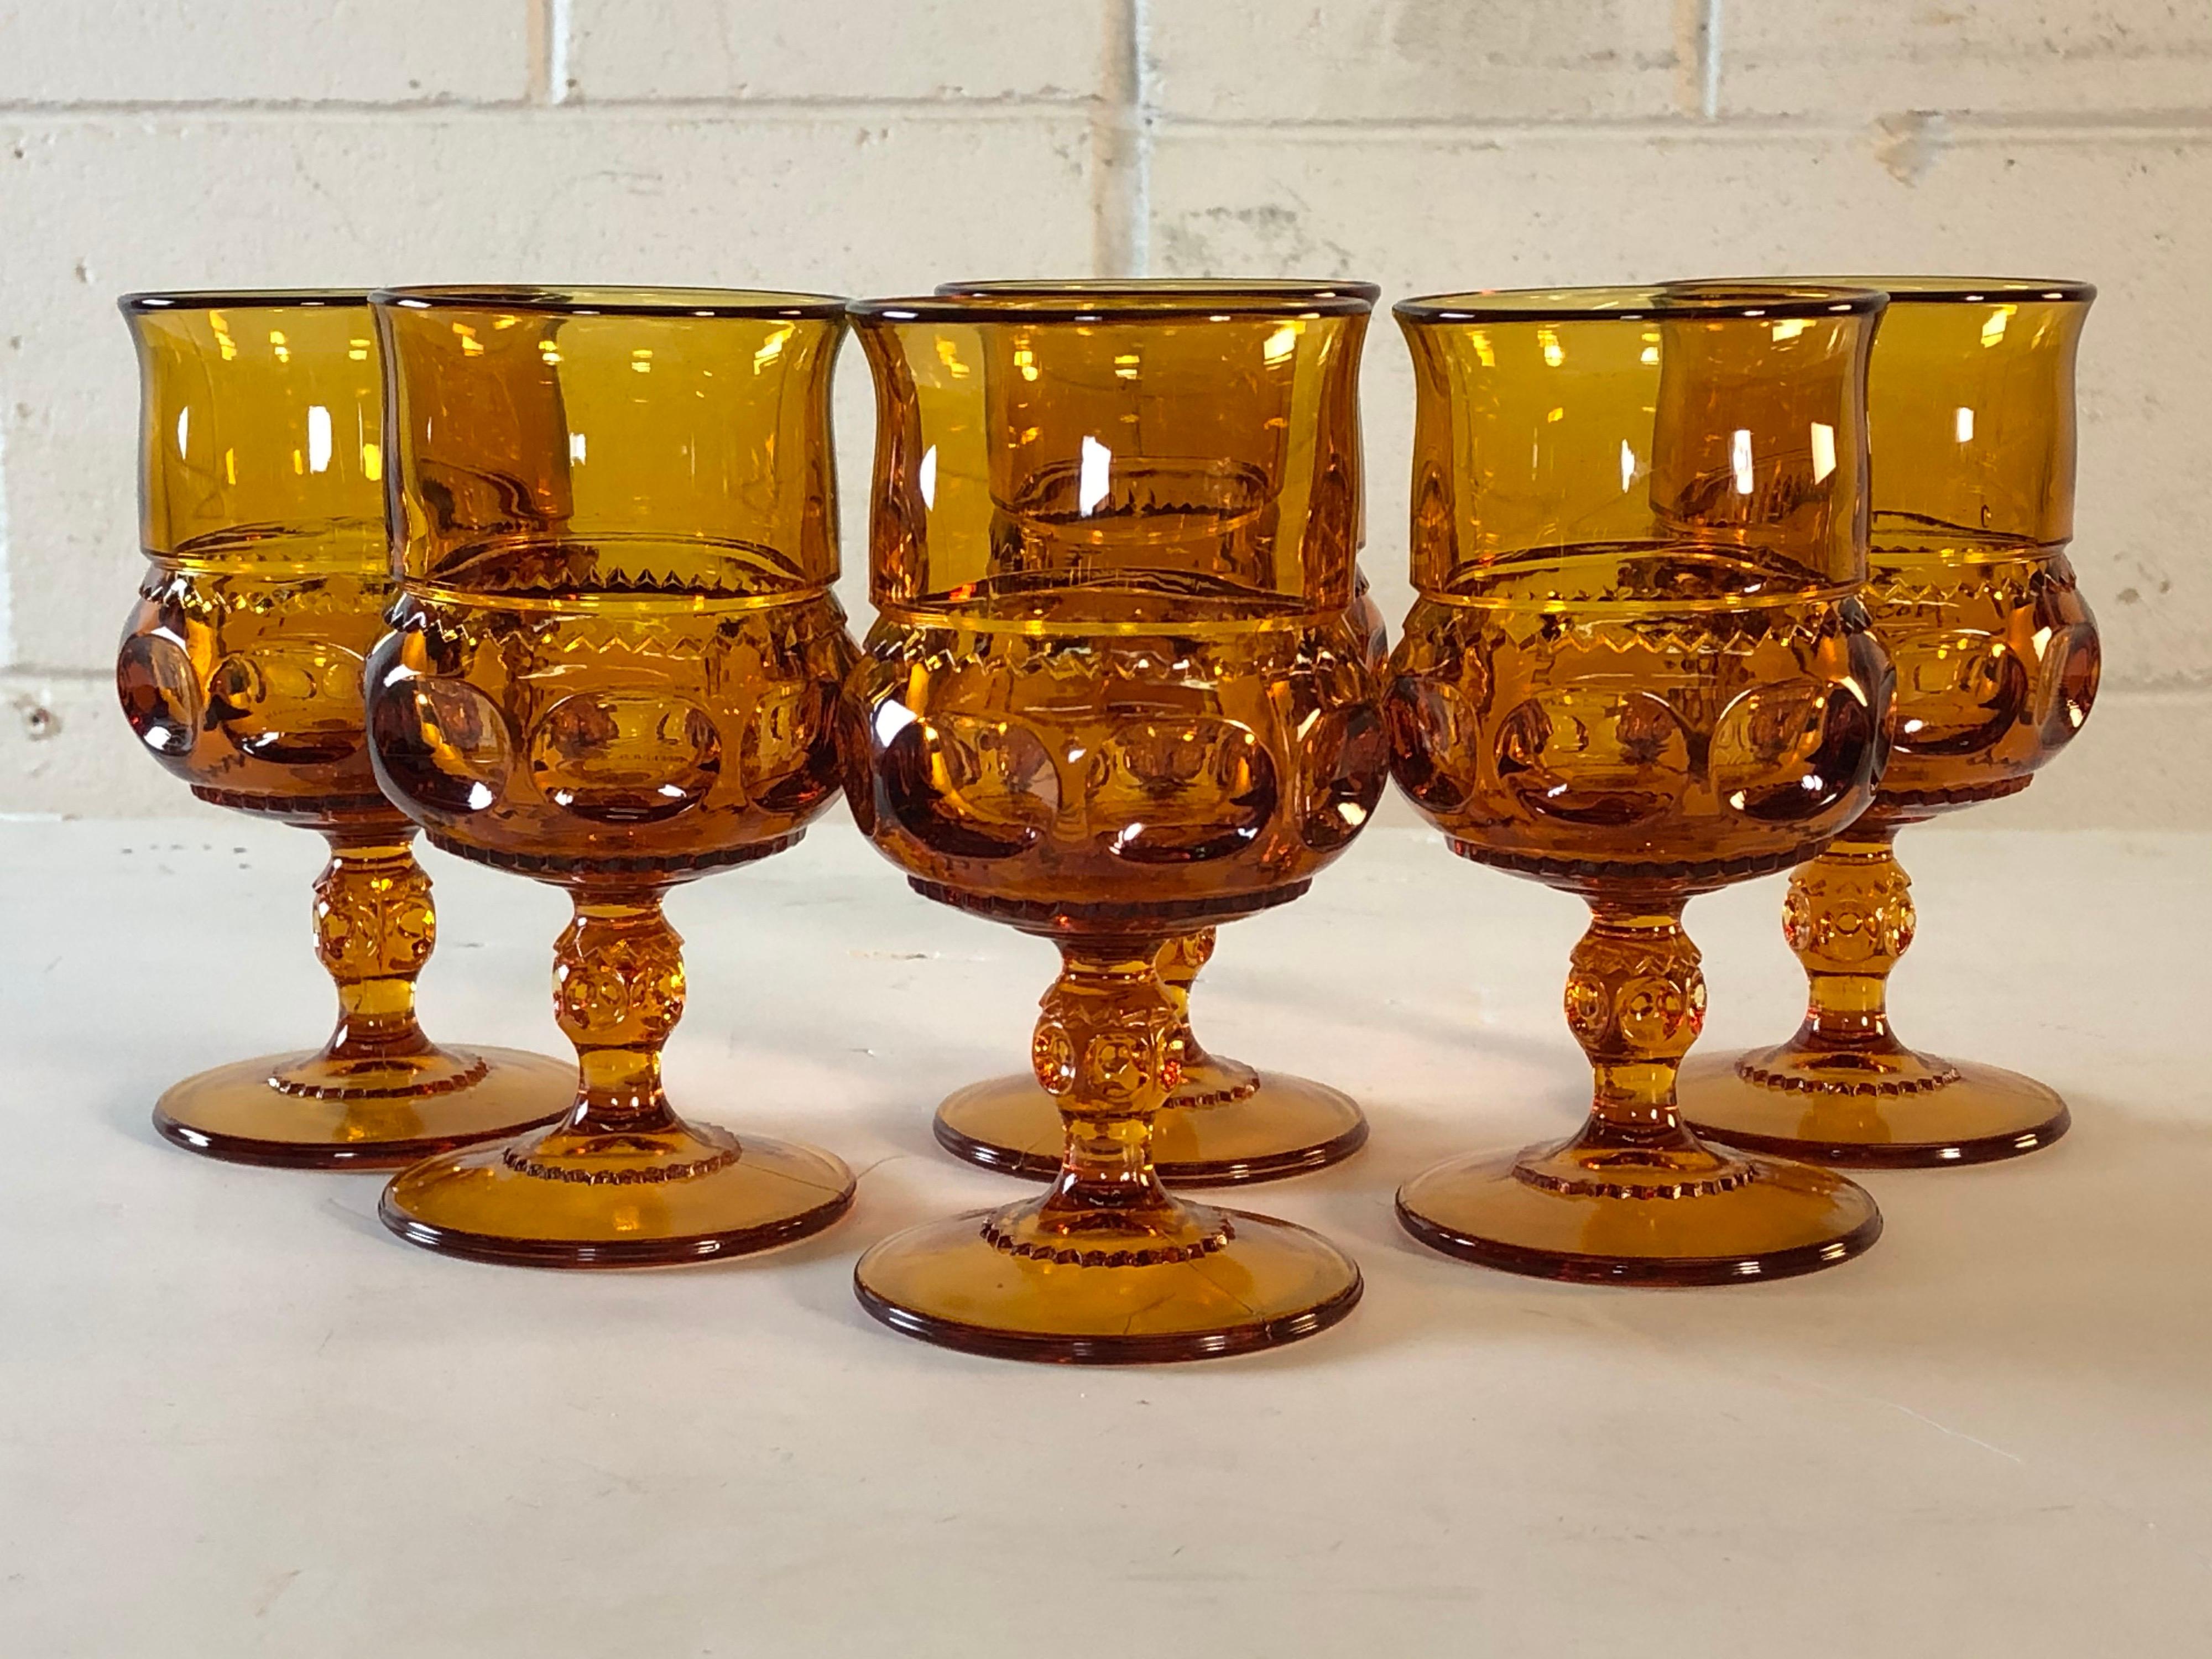 Vintage 1960s set of 6 amber King’s Crown water or wine goblets. Excellent condition. No marks.